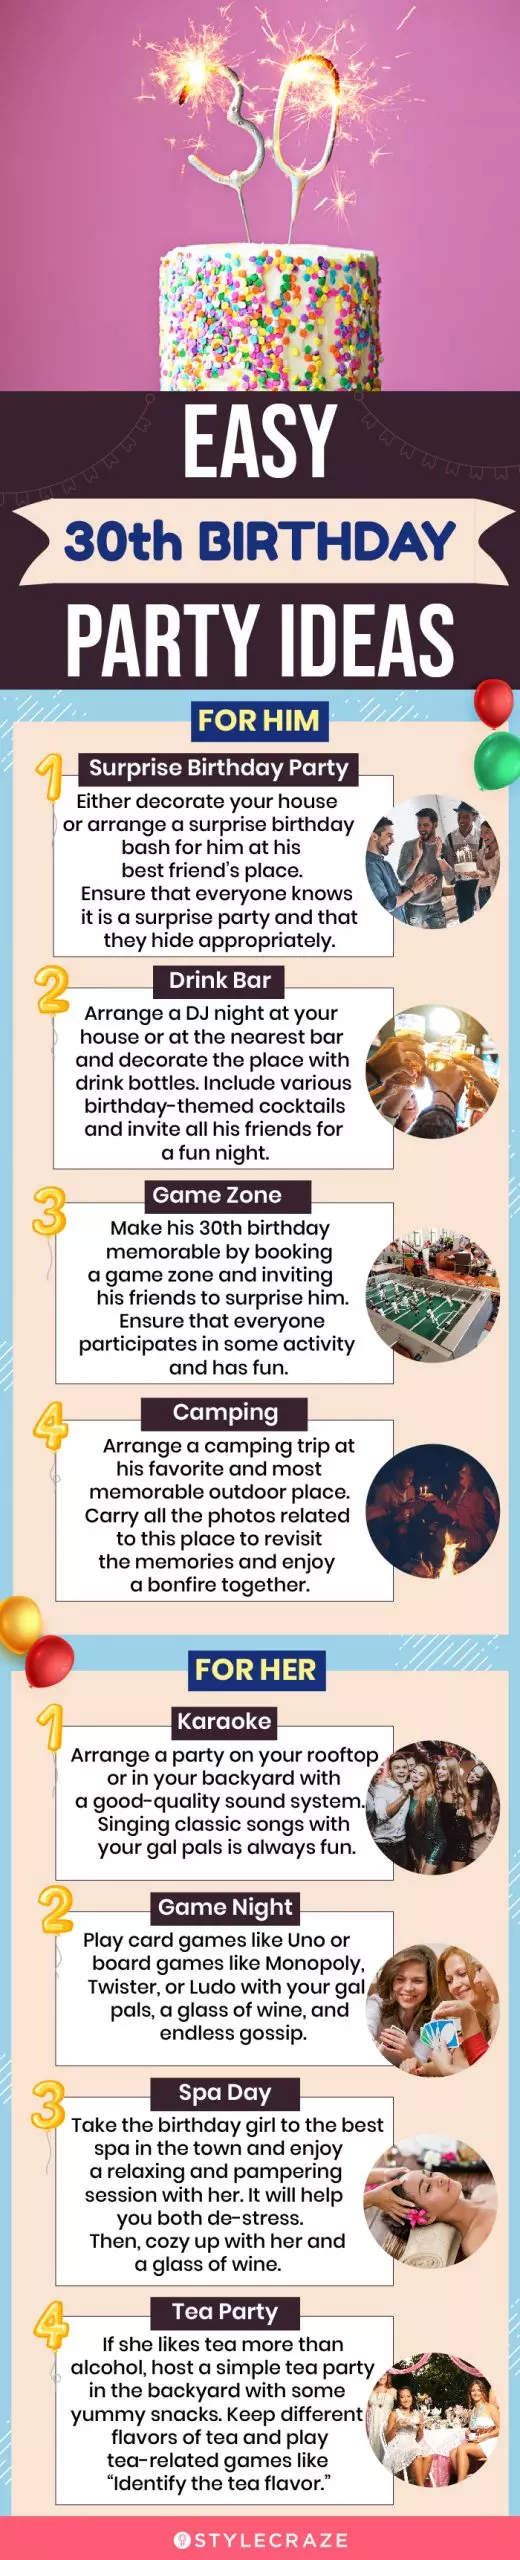 easy 30th birthday party ideas (infographic)